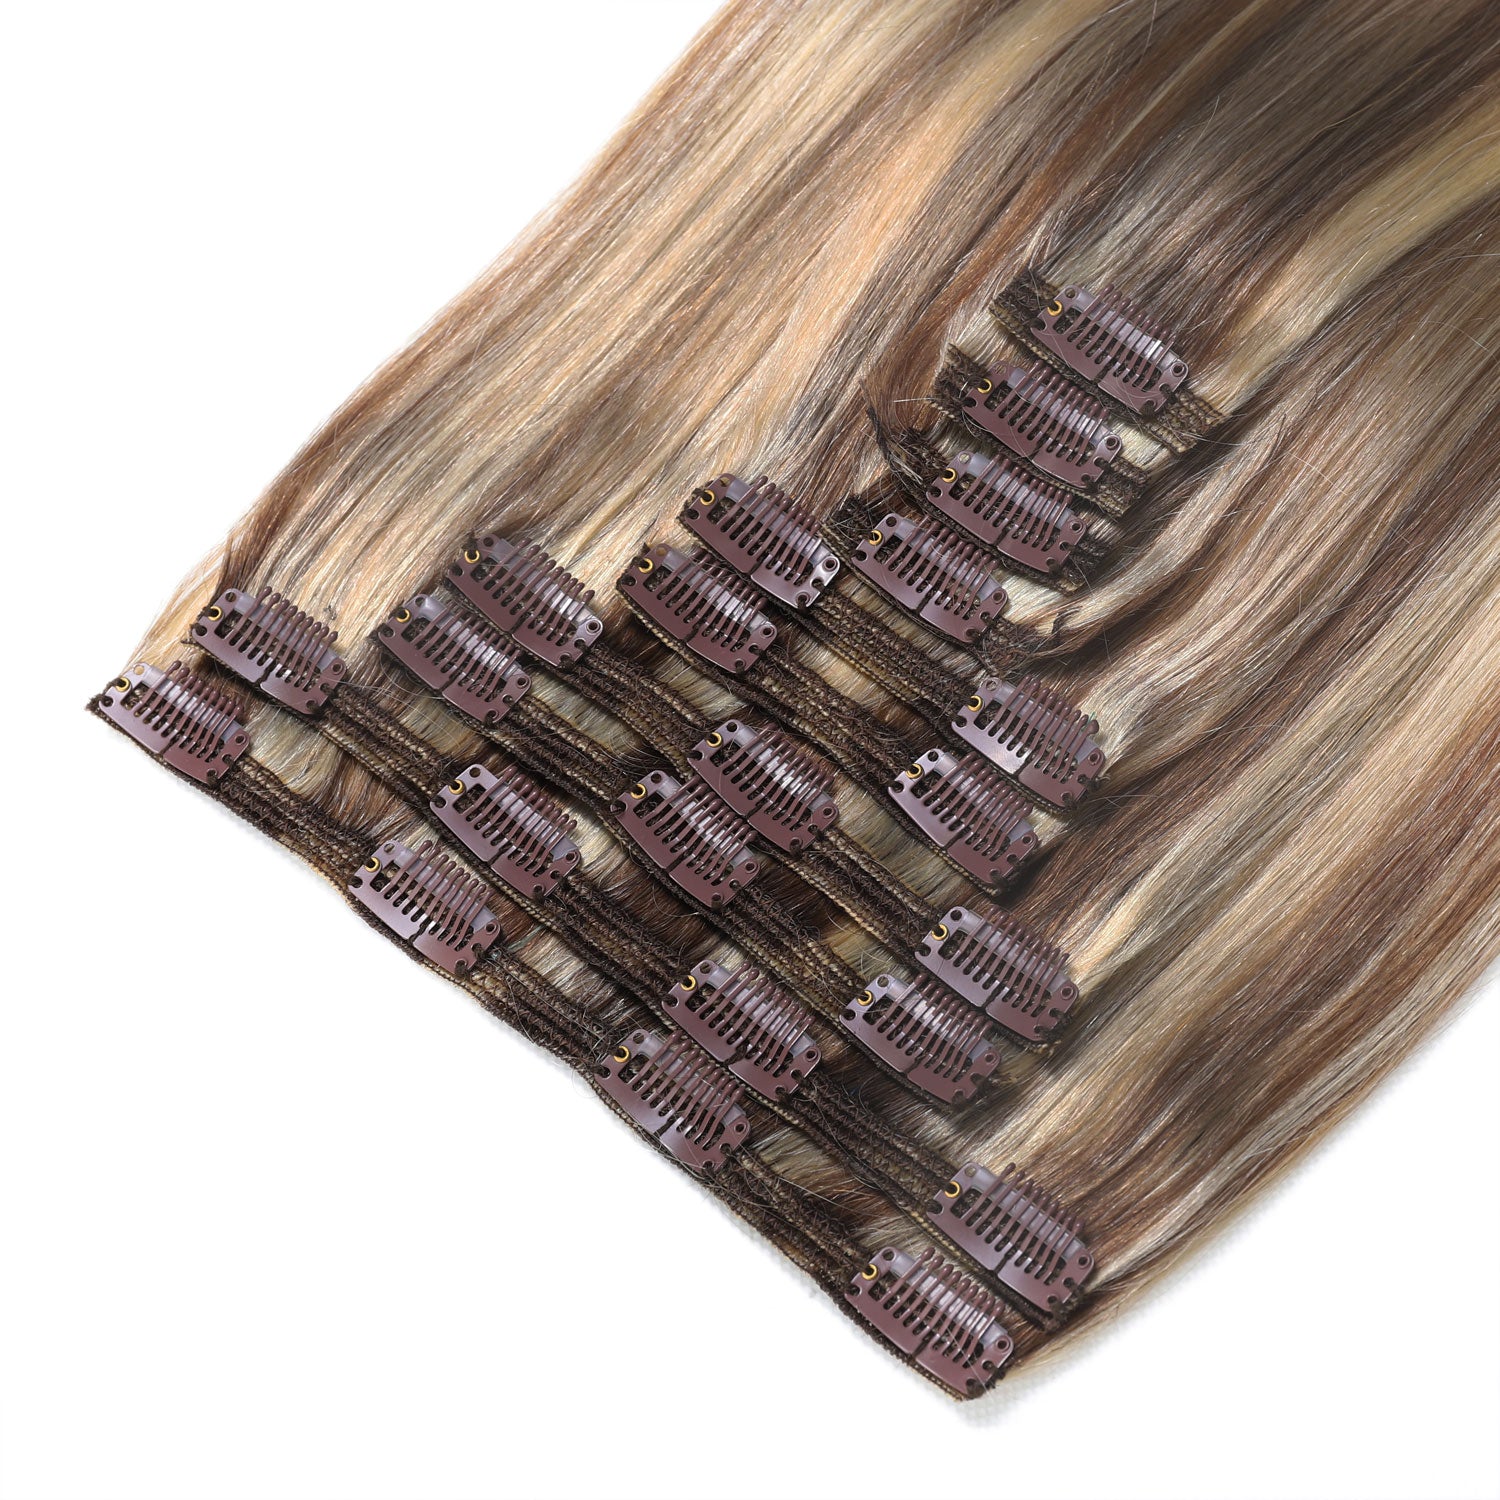 Clip In Hair Extensions #8/22 Ash Brown & Sandy Blonde Mix 17"